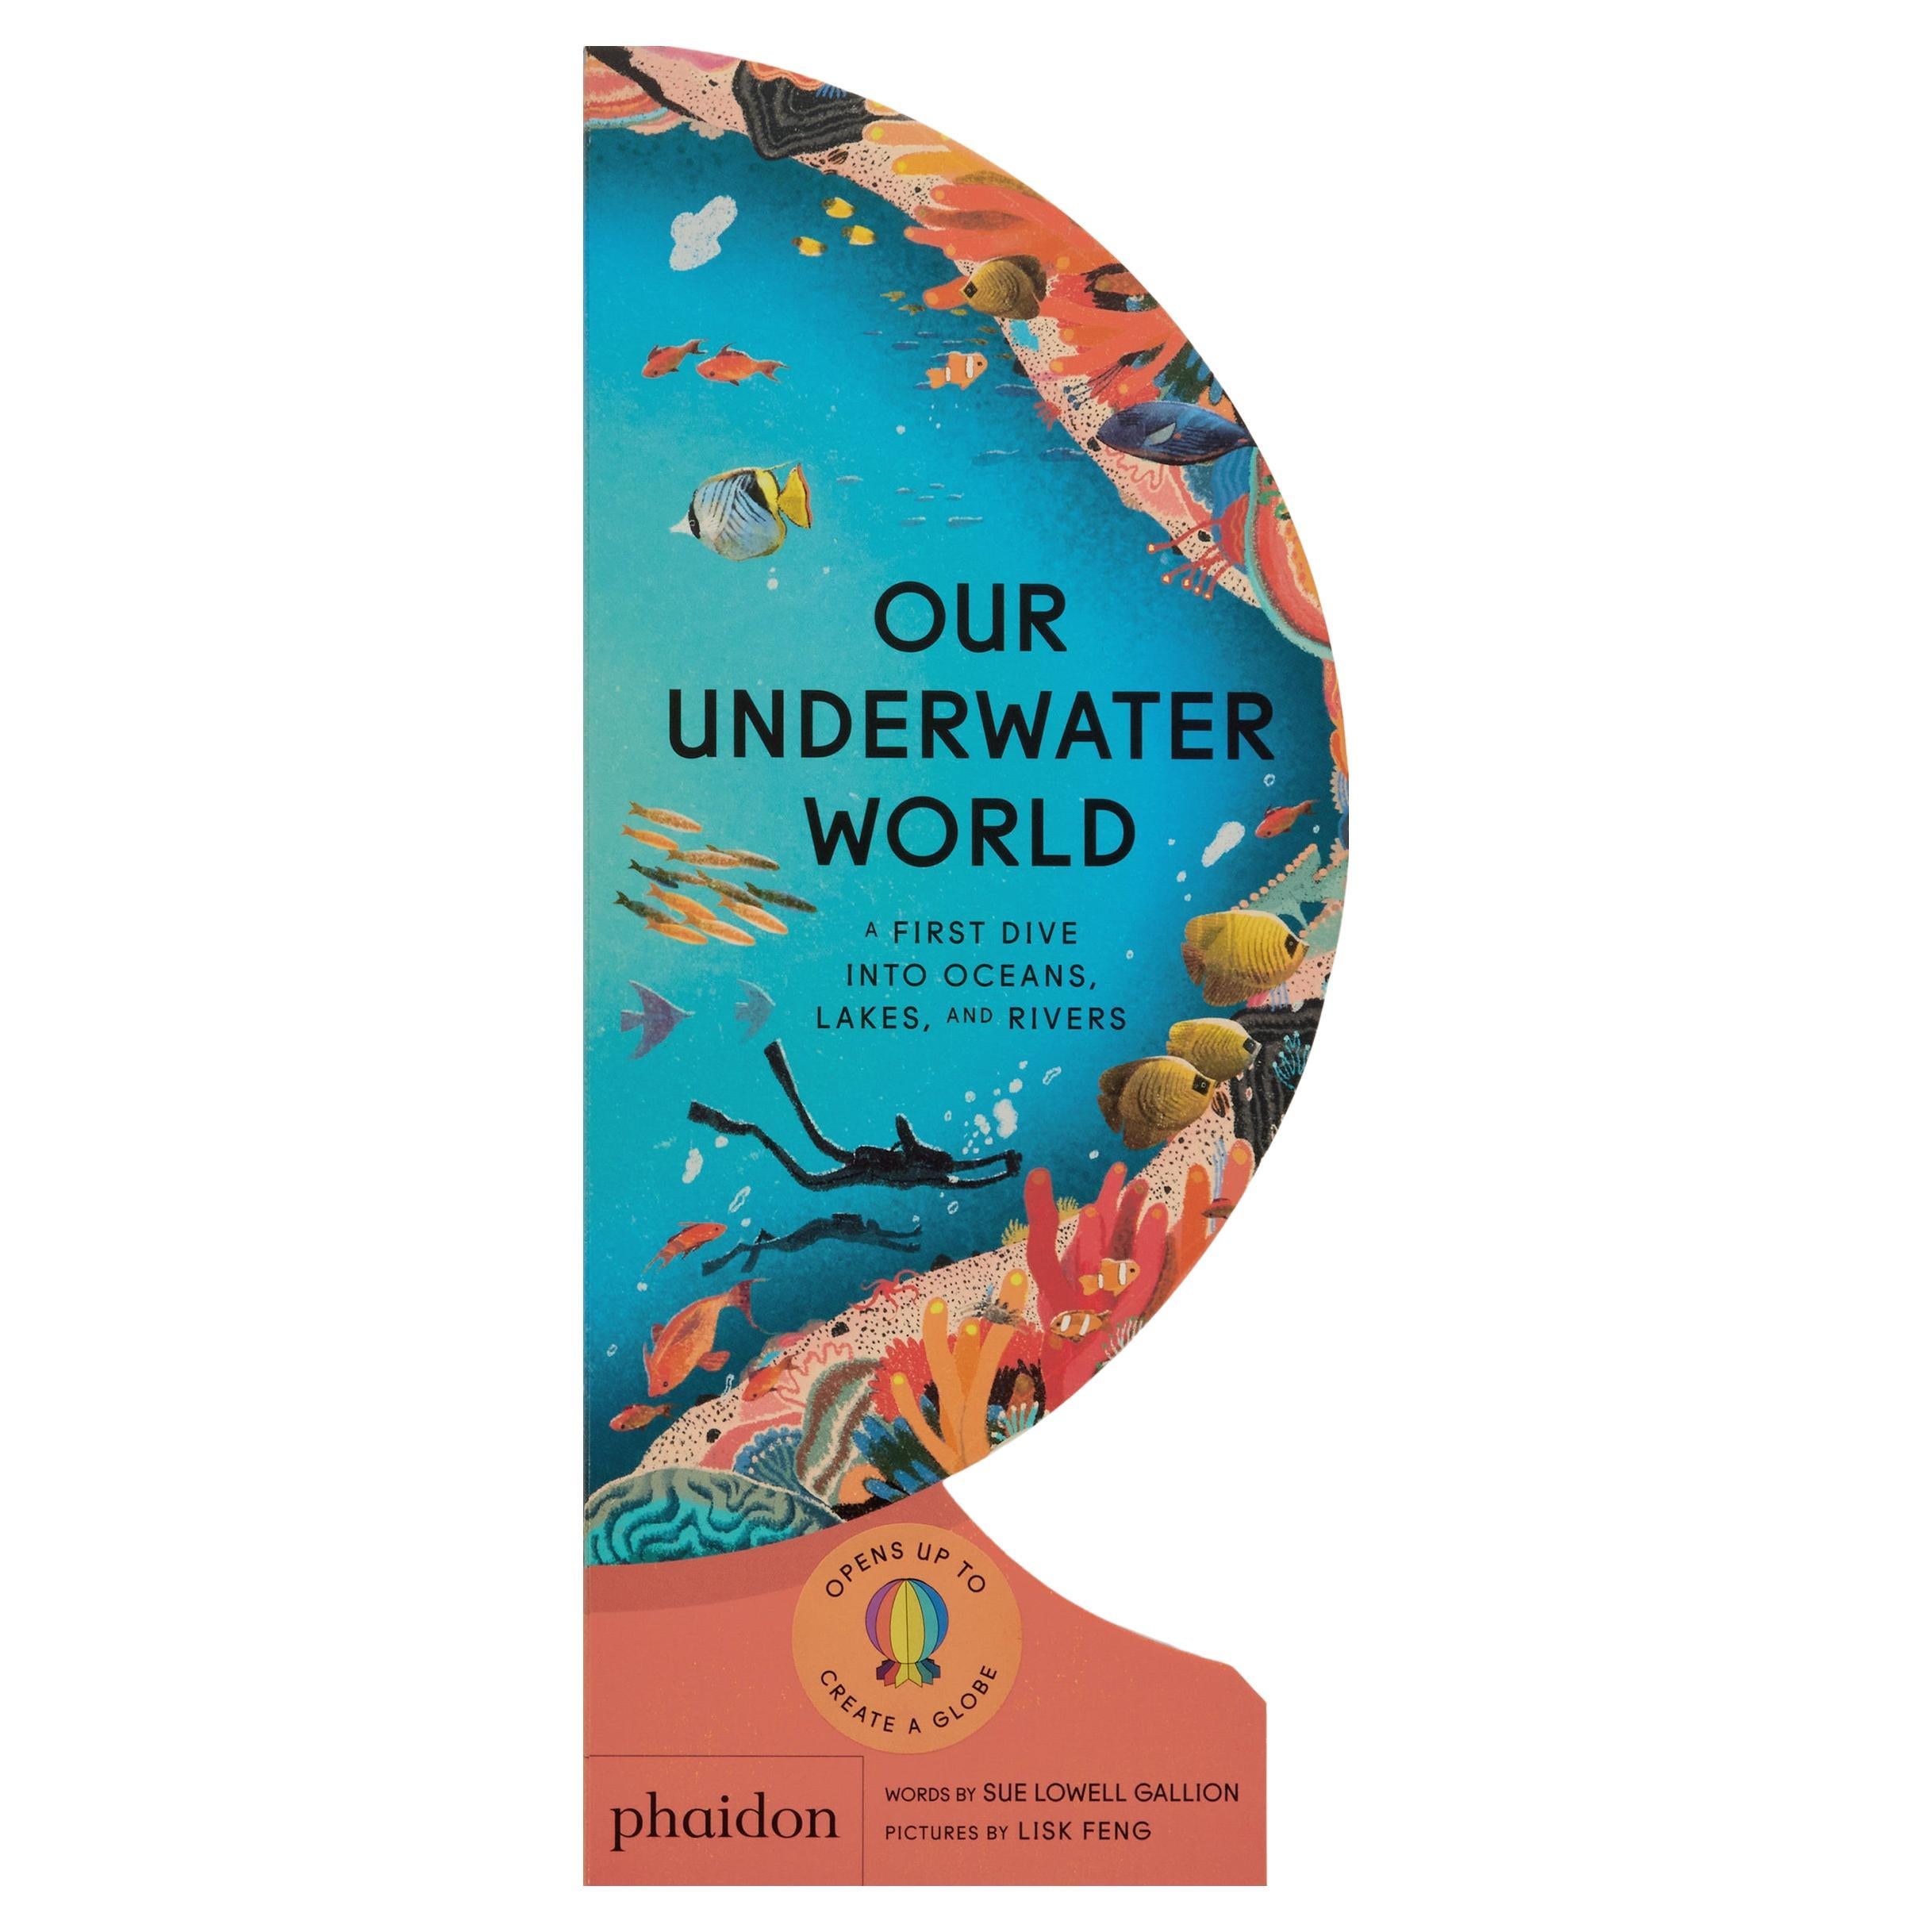 Our Underwater World A First Dive into Oceans, Lakes, and Rivers